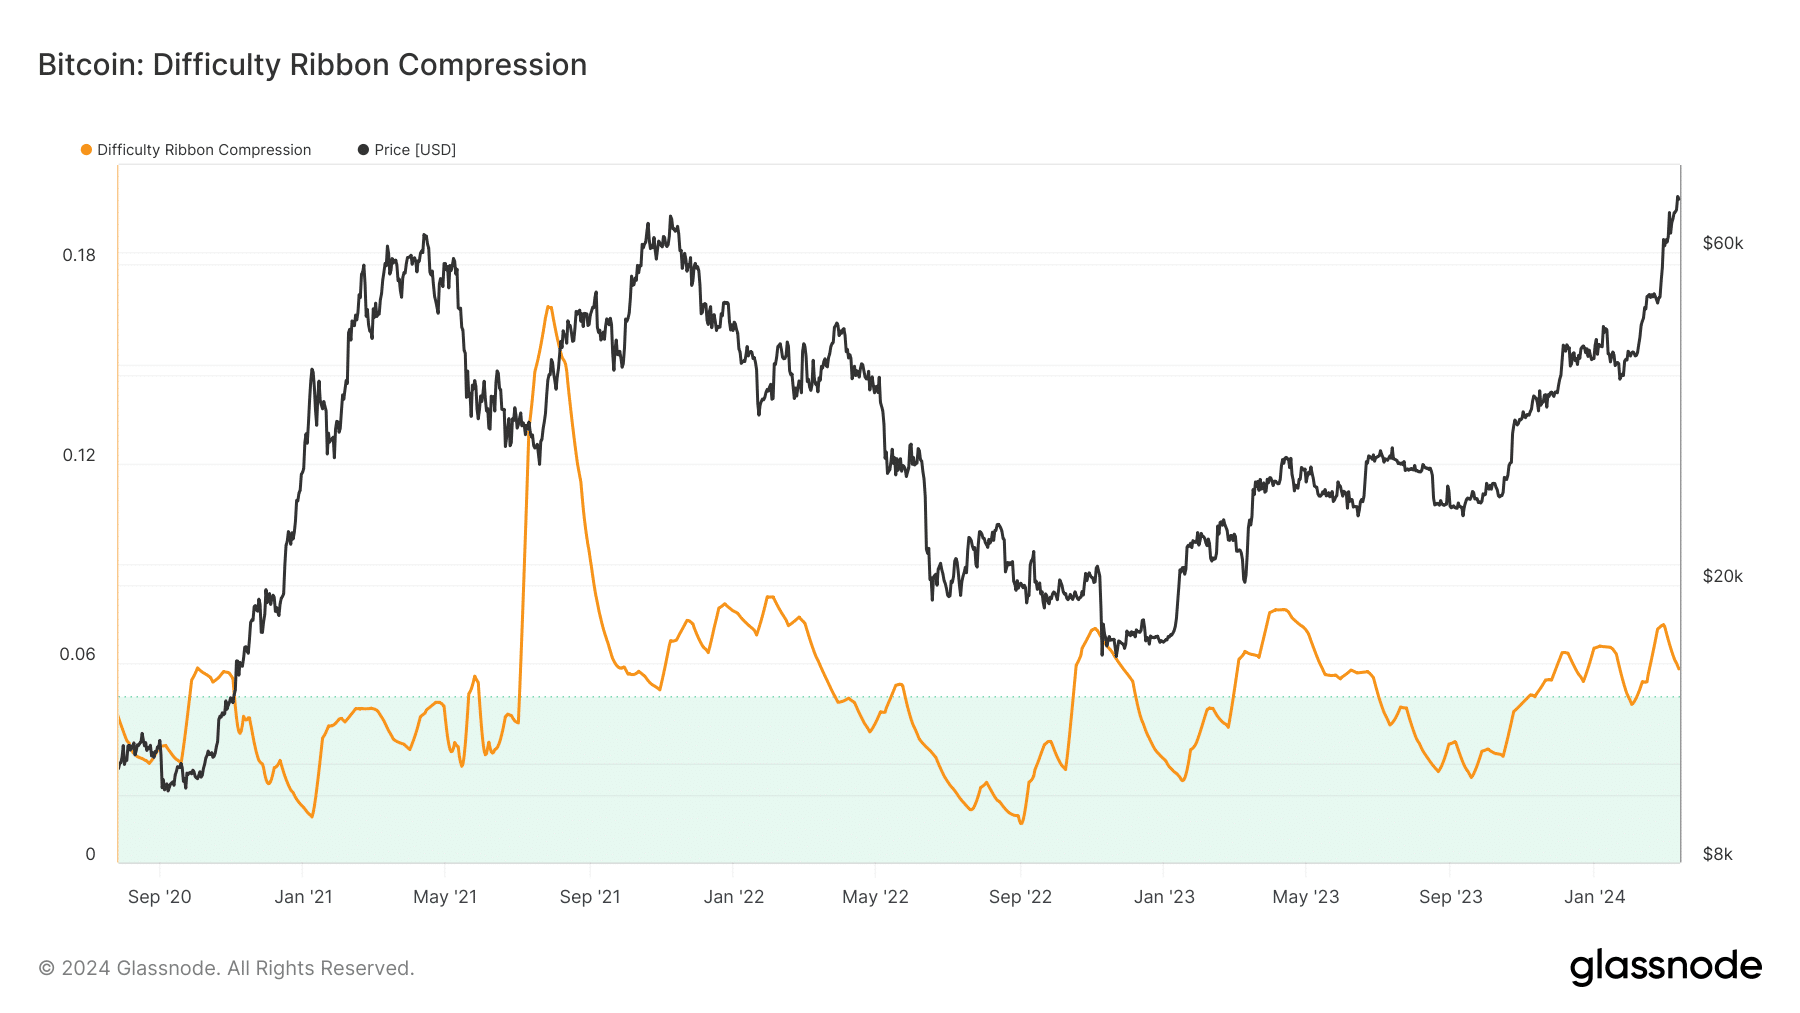 Bitcoin difficulty compression showing a bullish price prediction